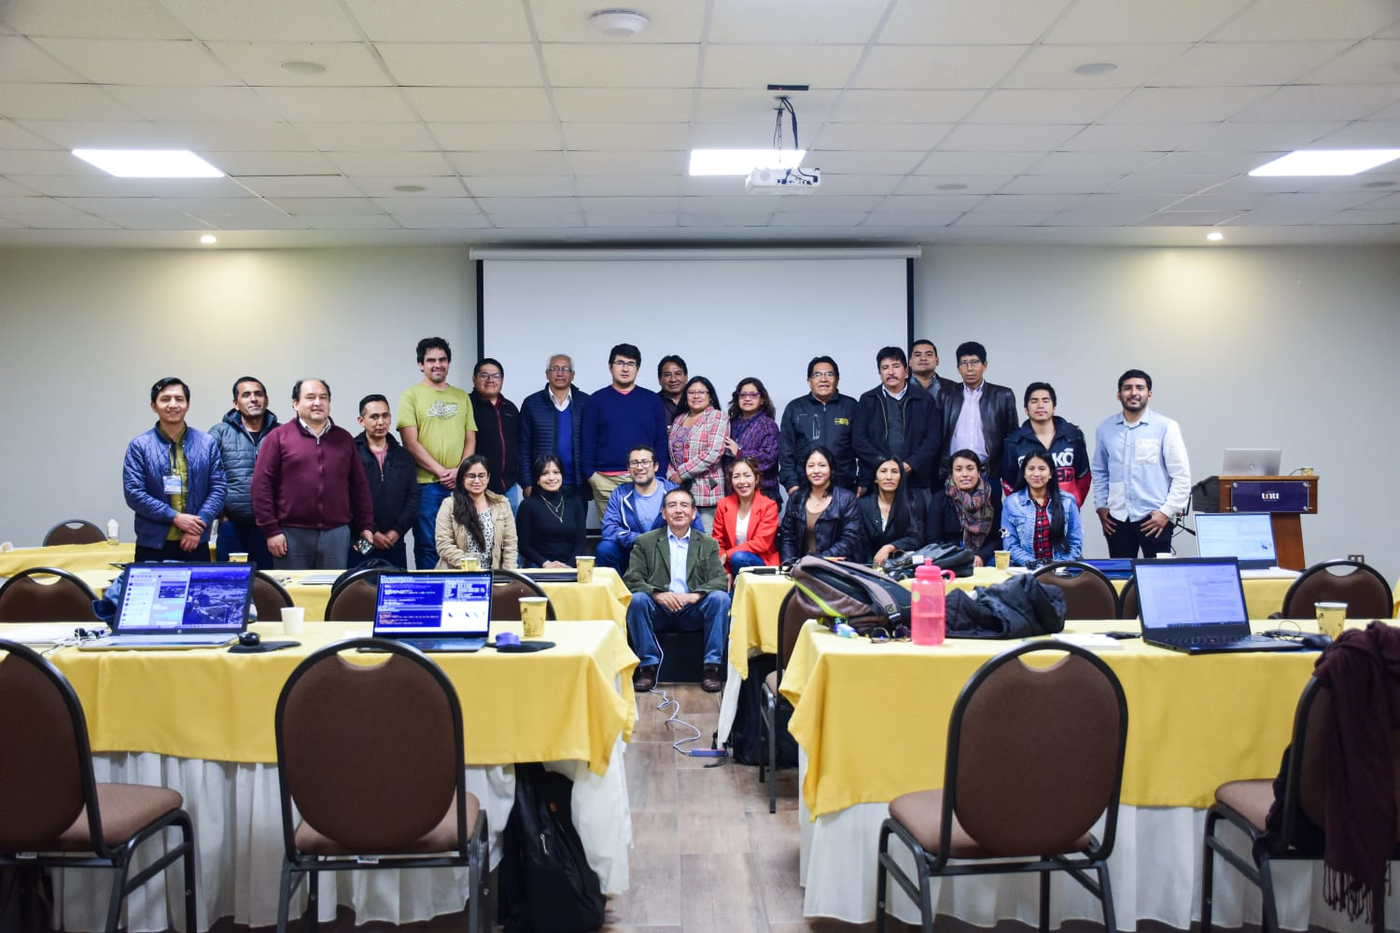 PIK hydrologist leads course on hydrological modeling of climate change impacts on water availability in Peru